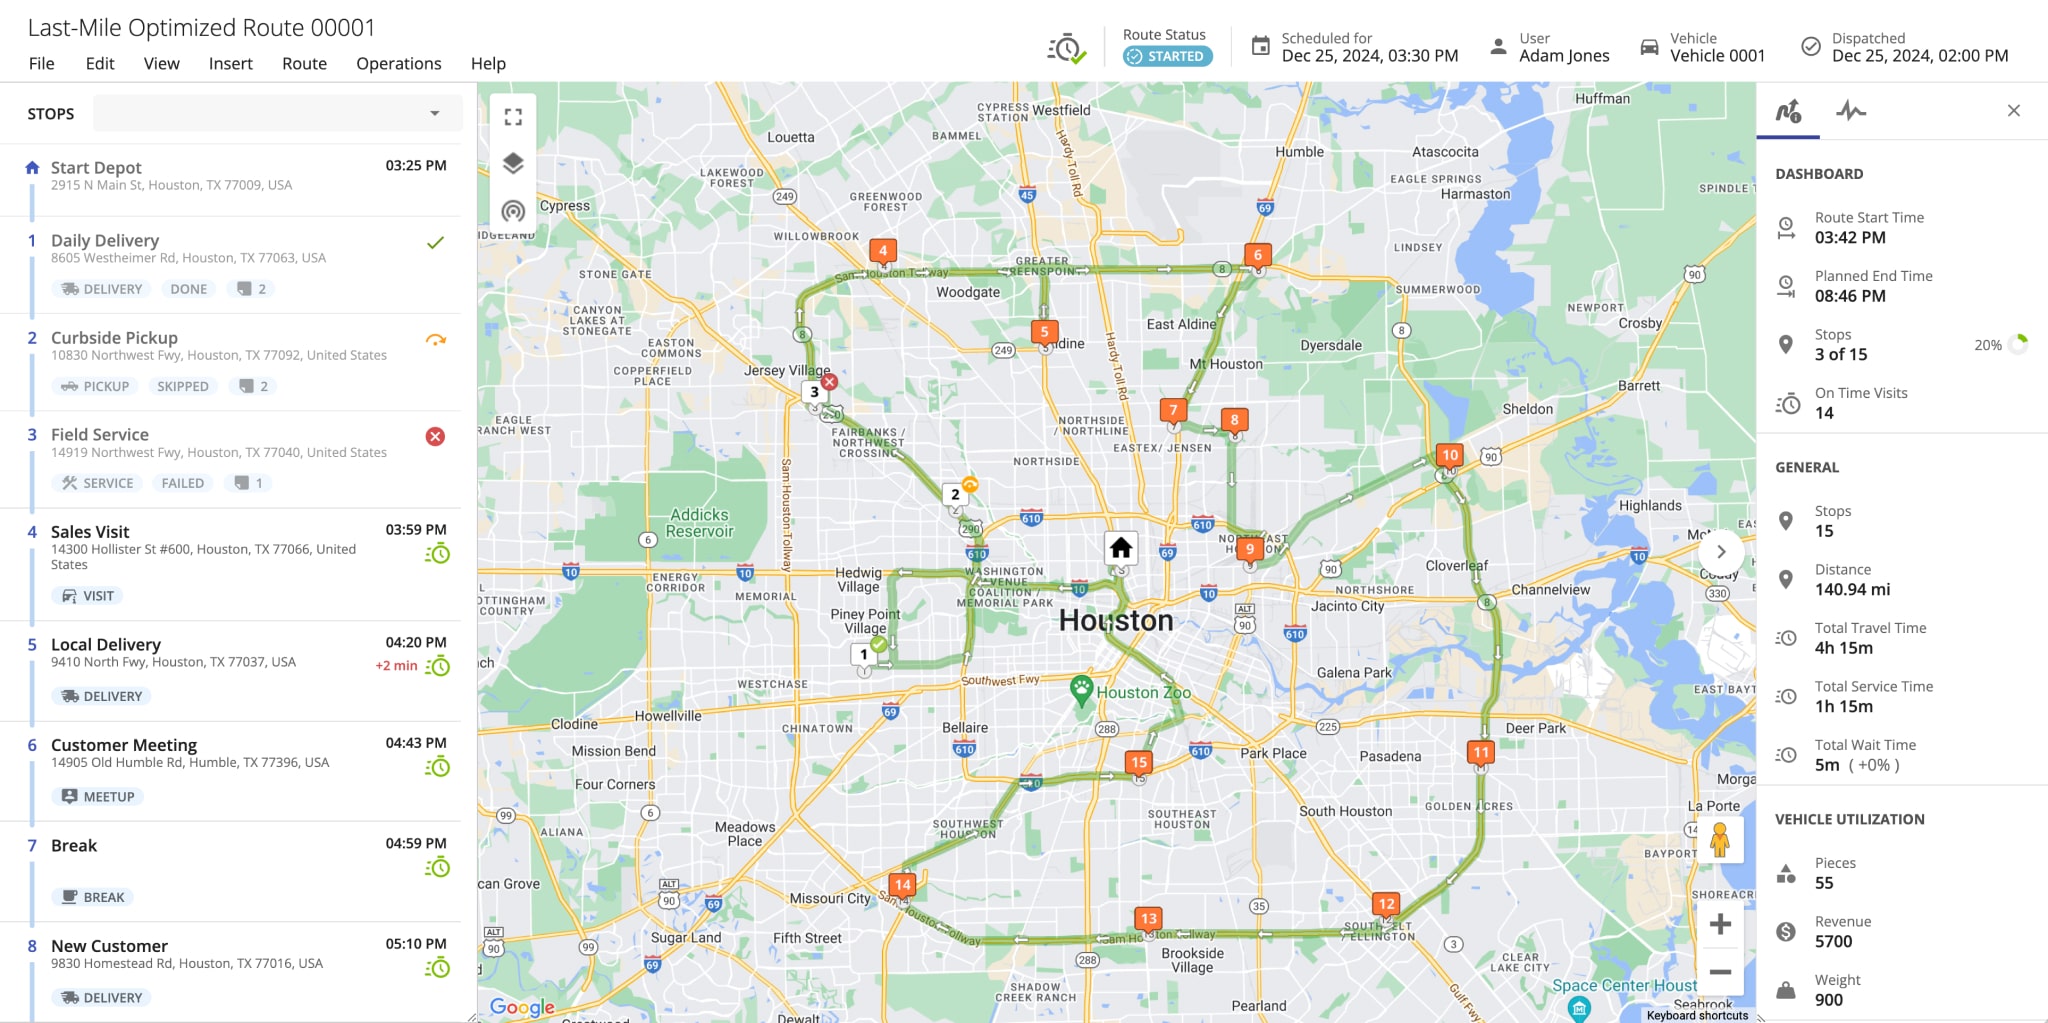 Open and manage individual planned and optimized last mile routes in Route4Me's Route Editor.